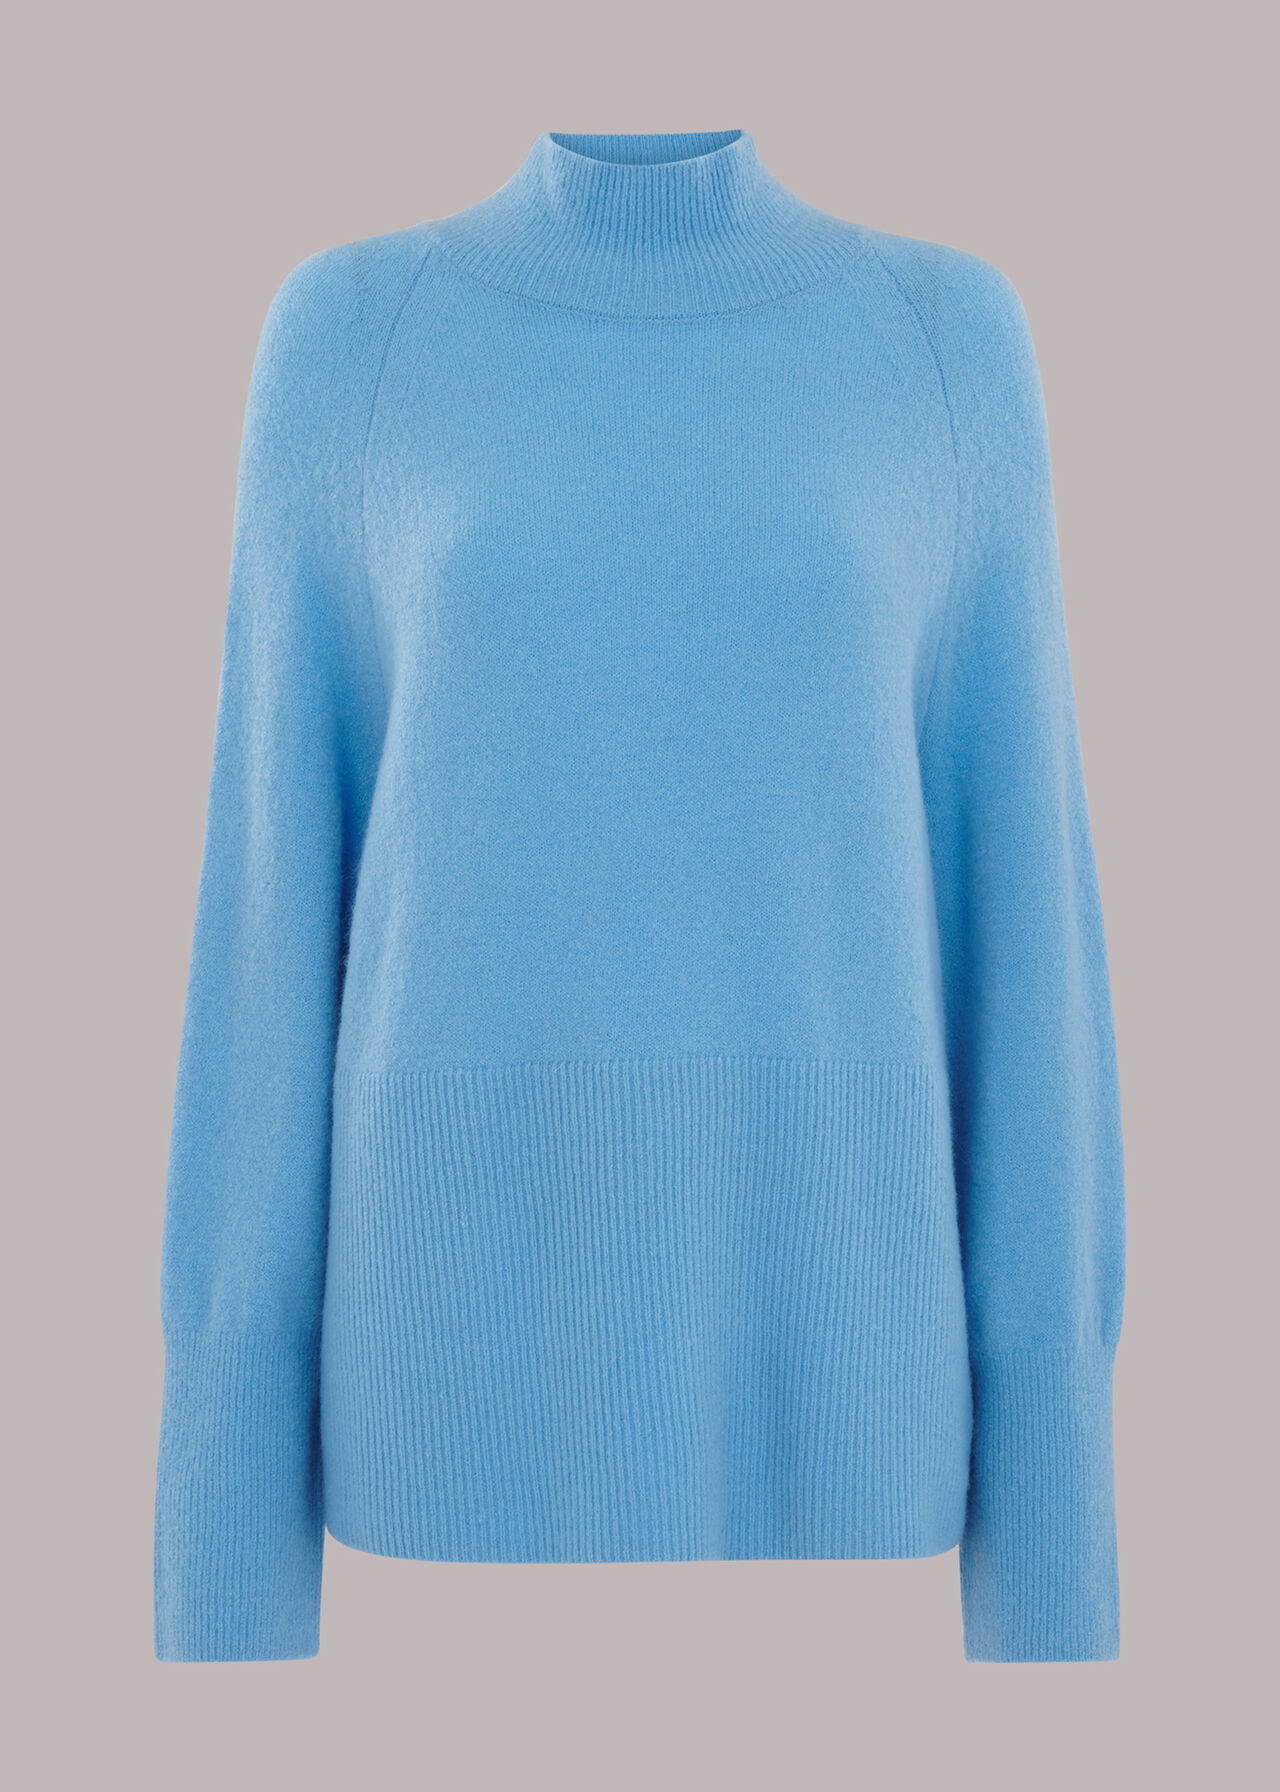 Relaxed Funnel Neck Jumper